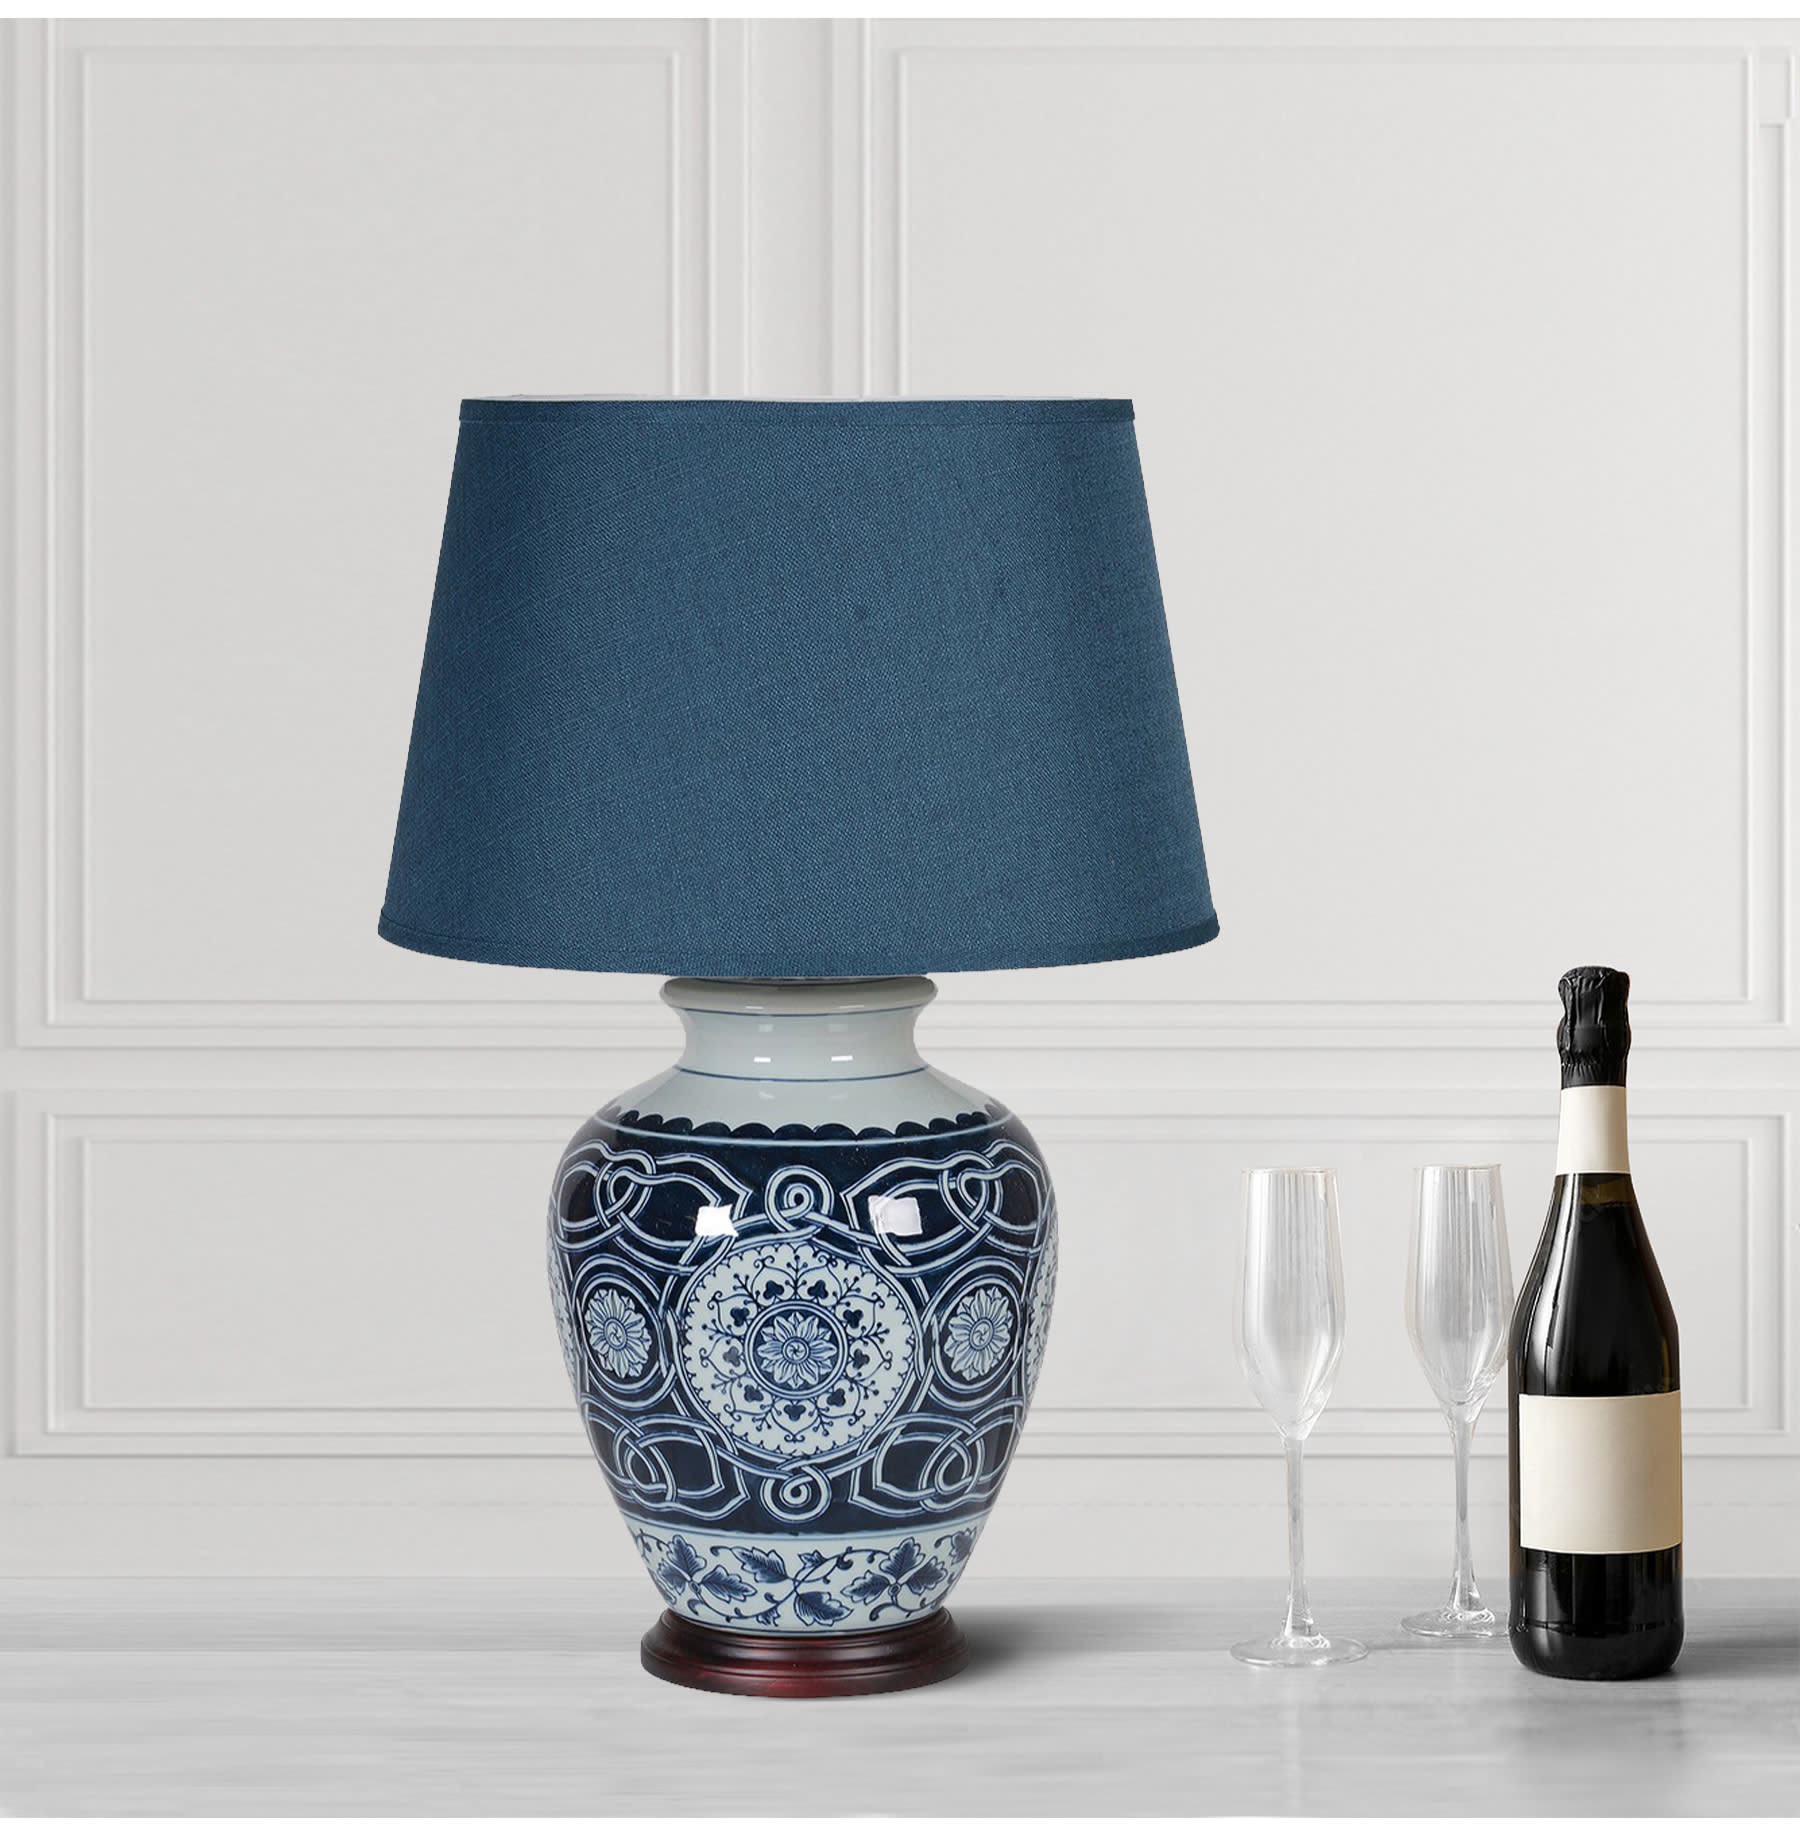 Blue and White Patterned Table Lamp